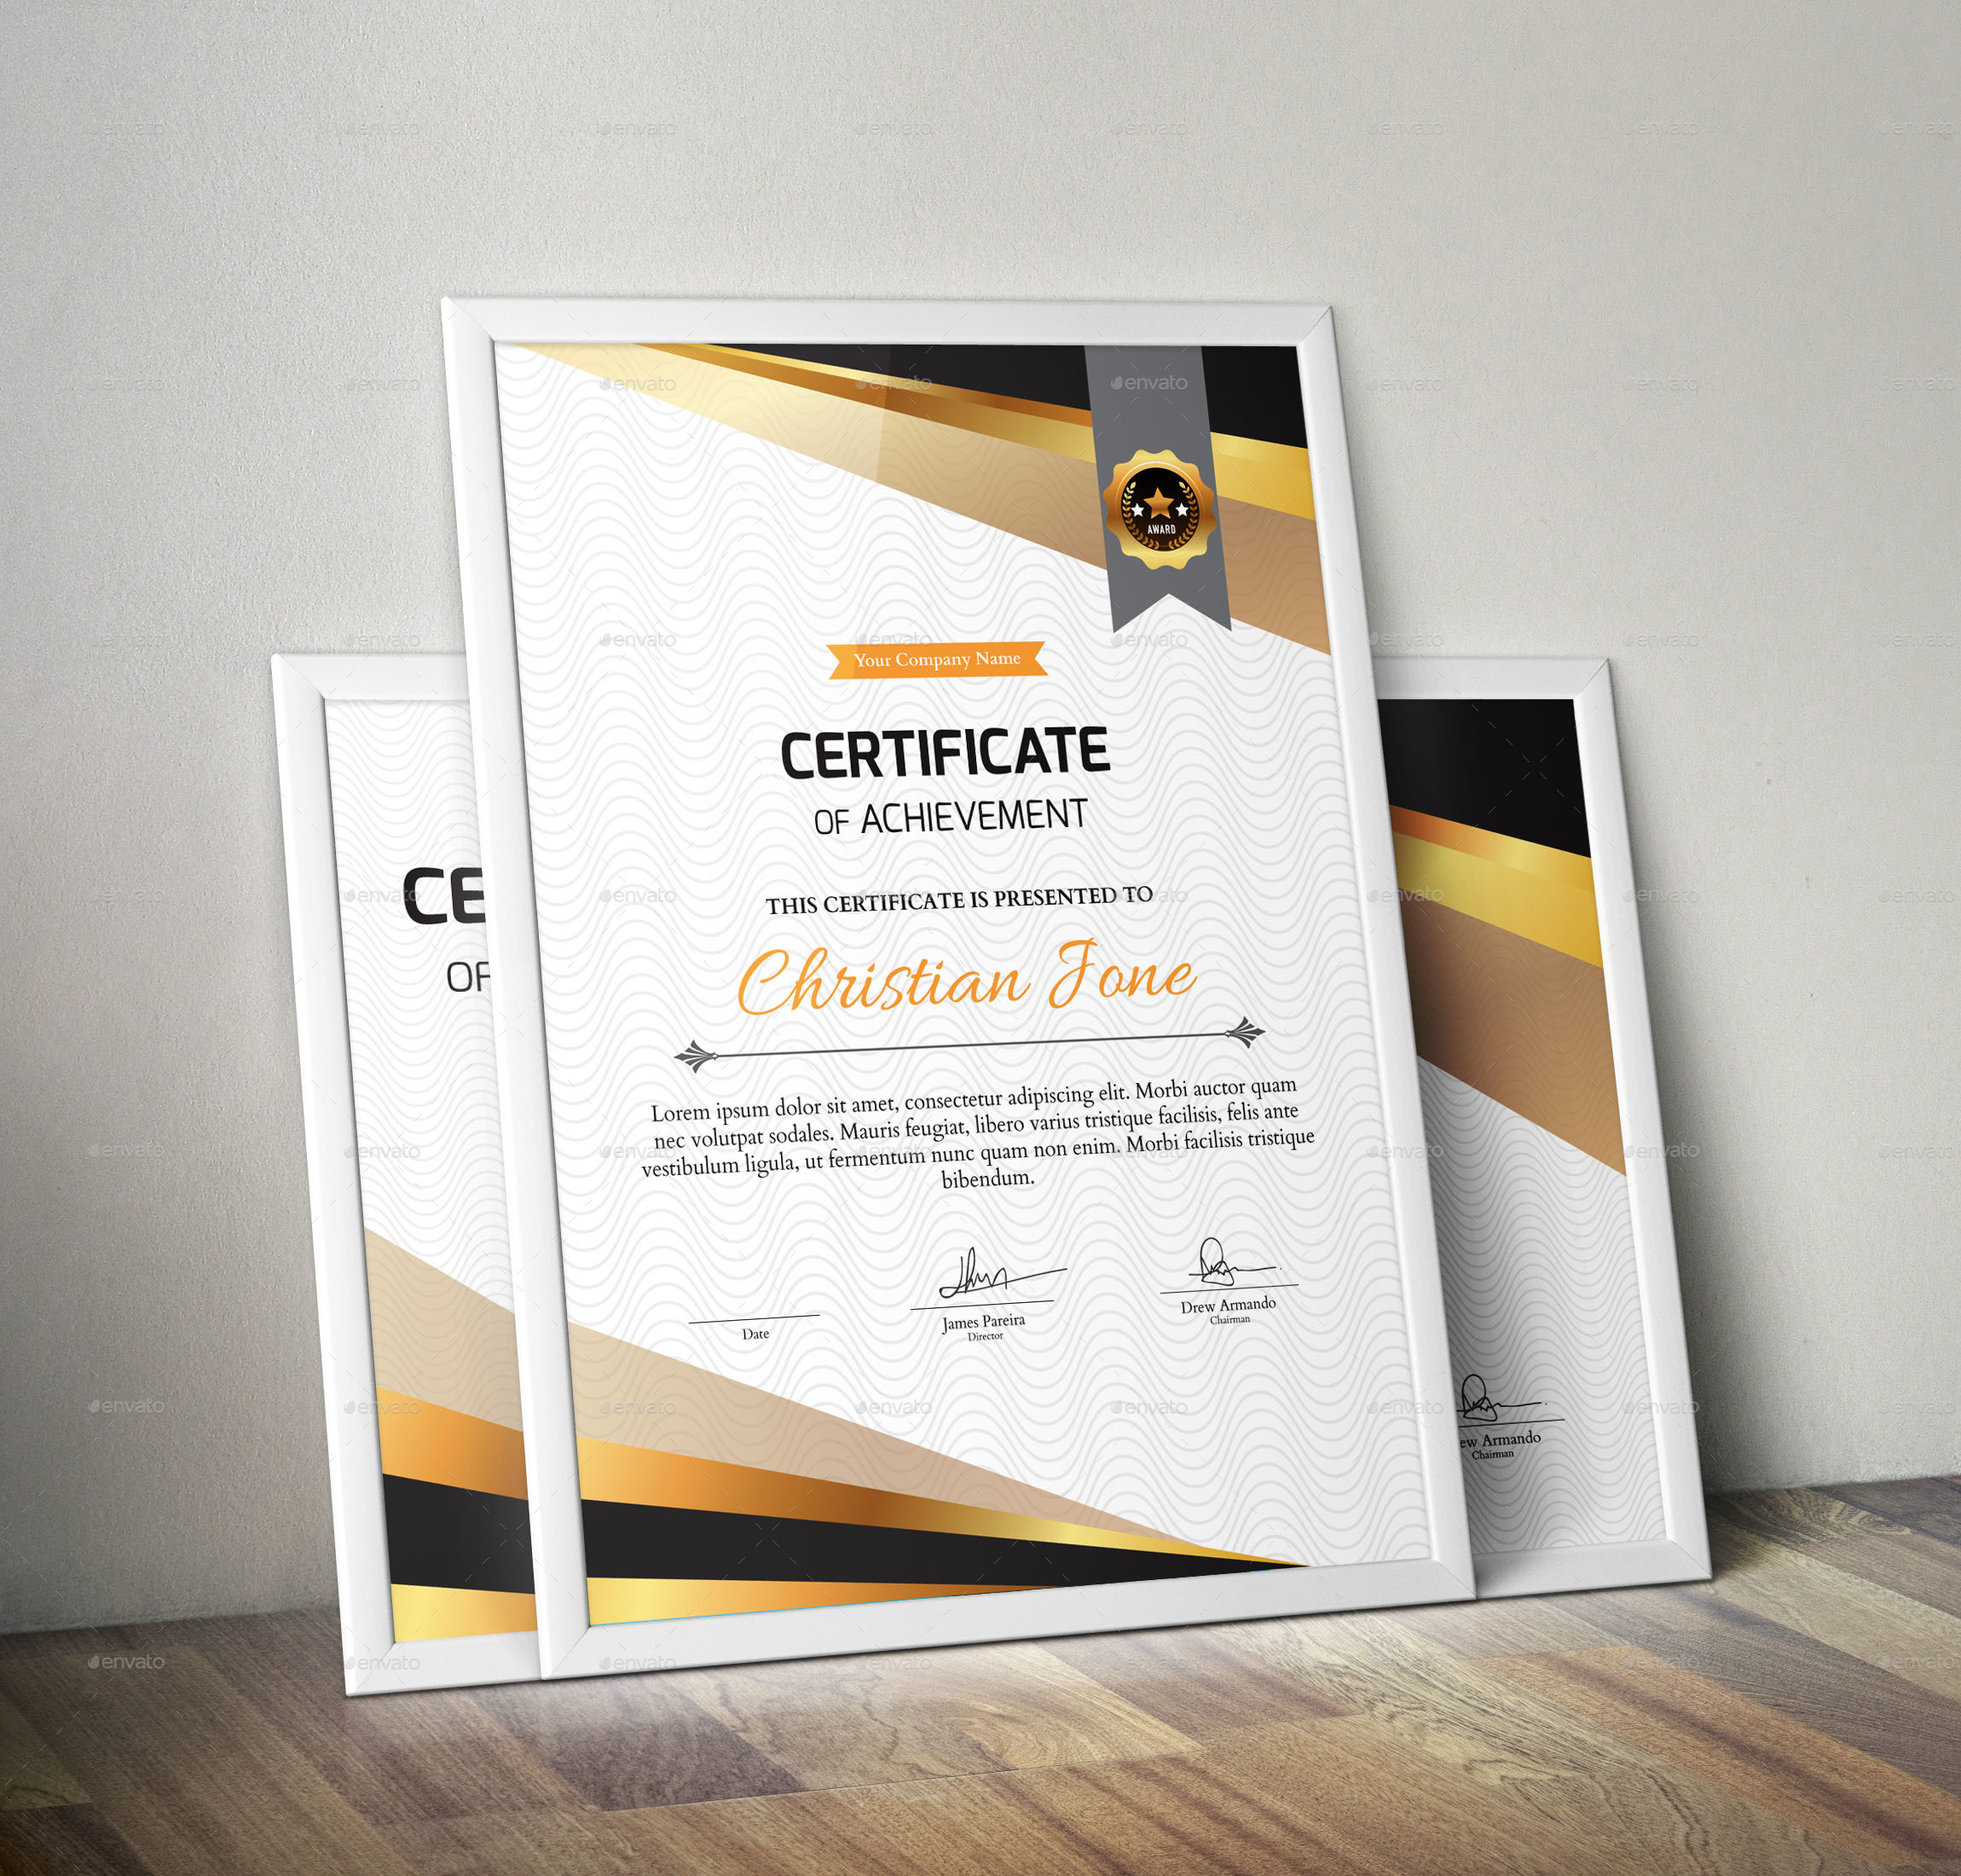 Certificate by sketchgraph | GraphicRiver